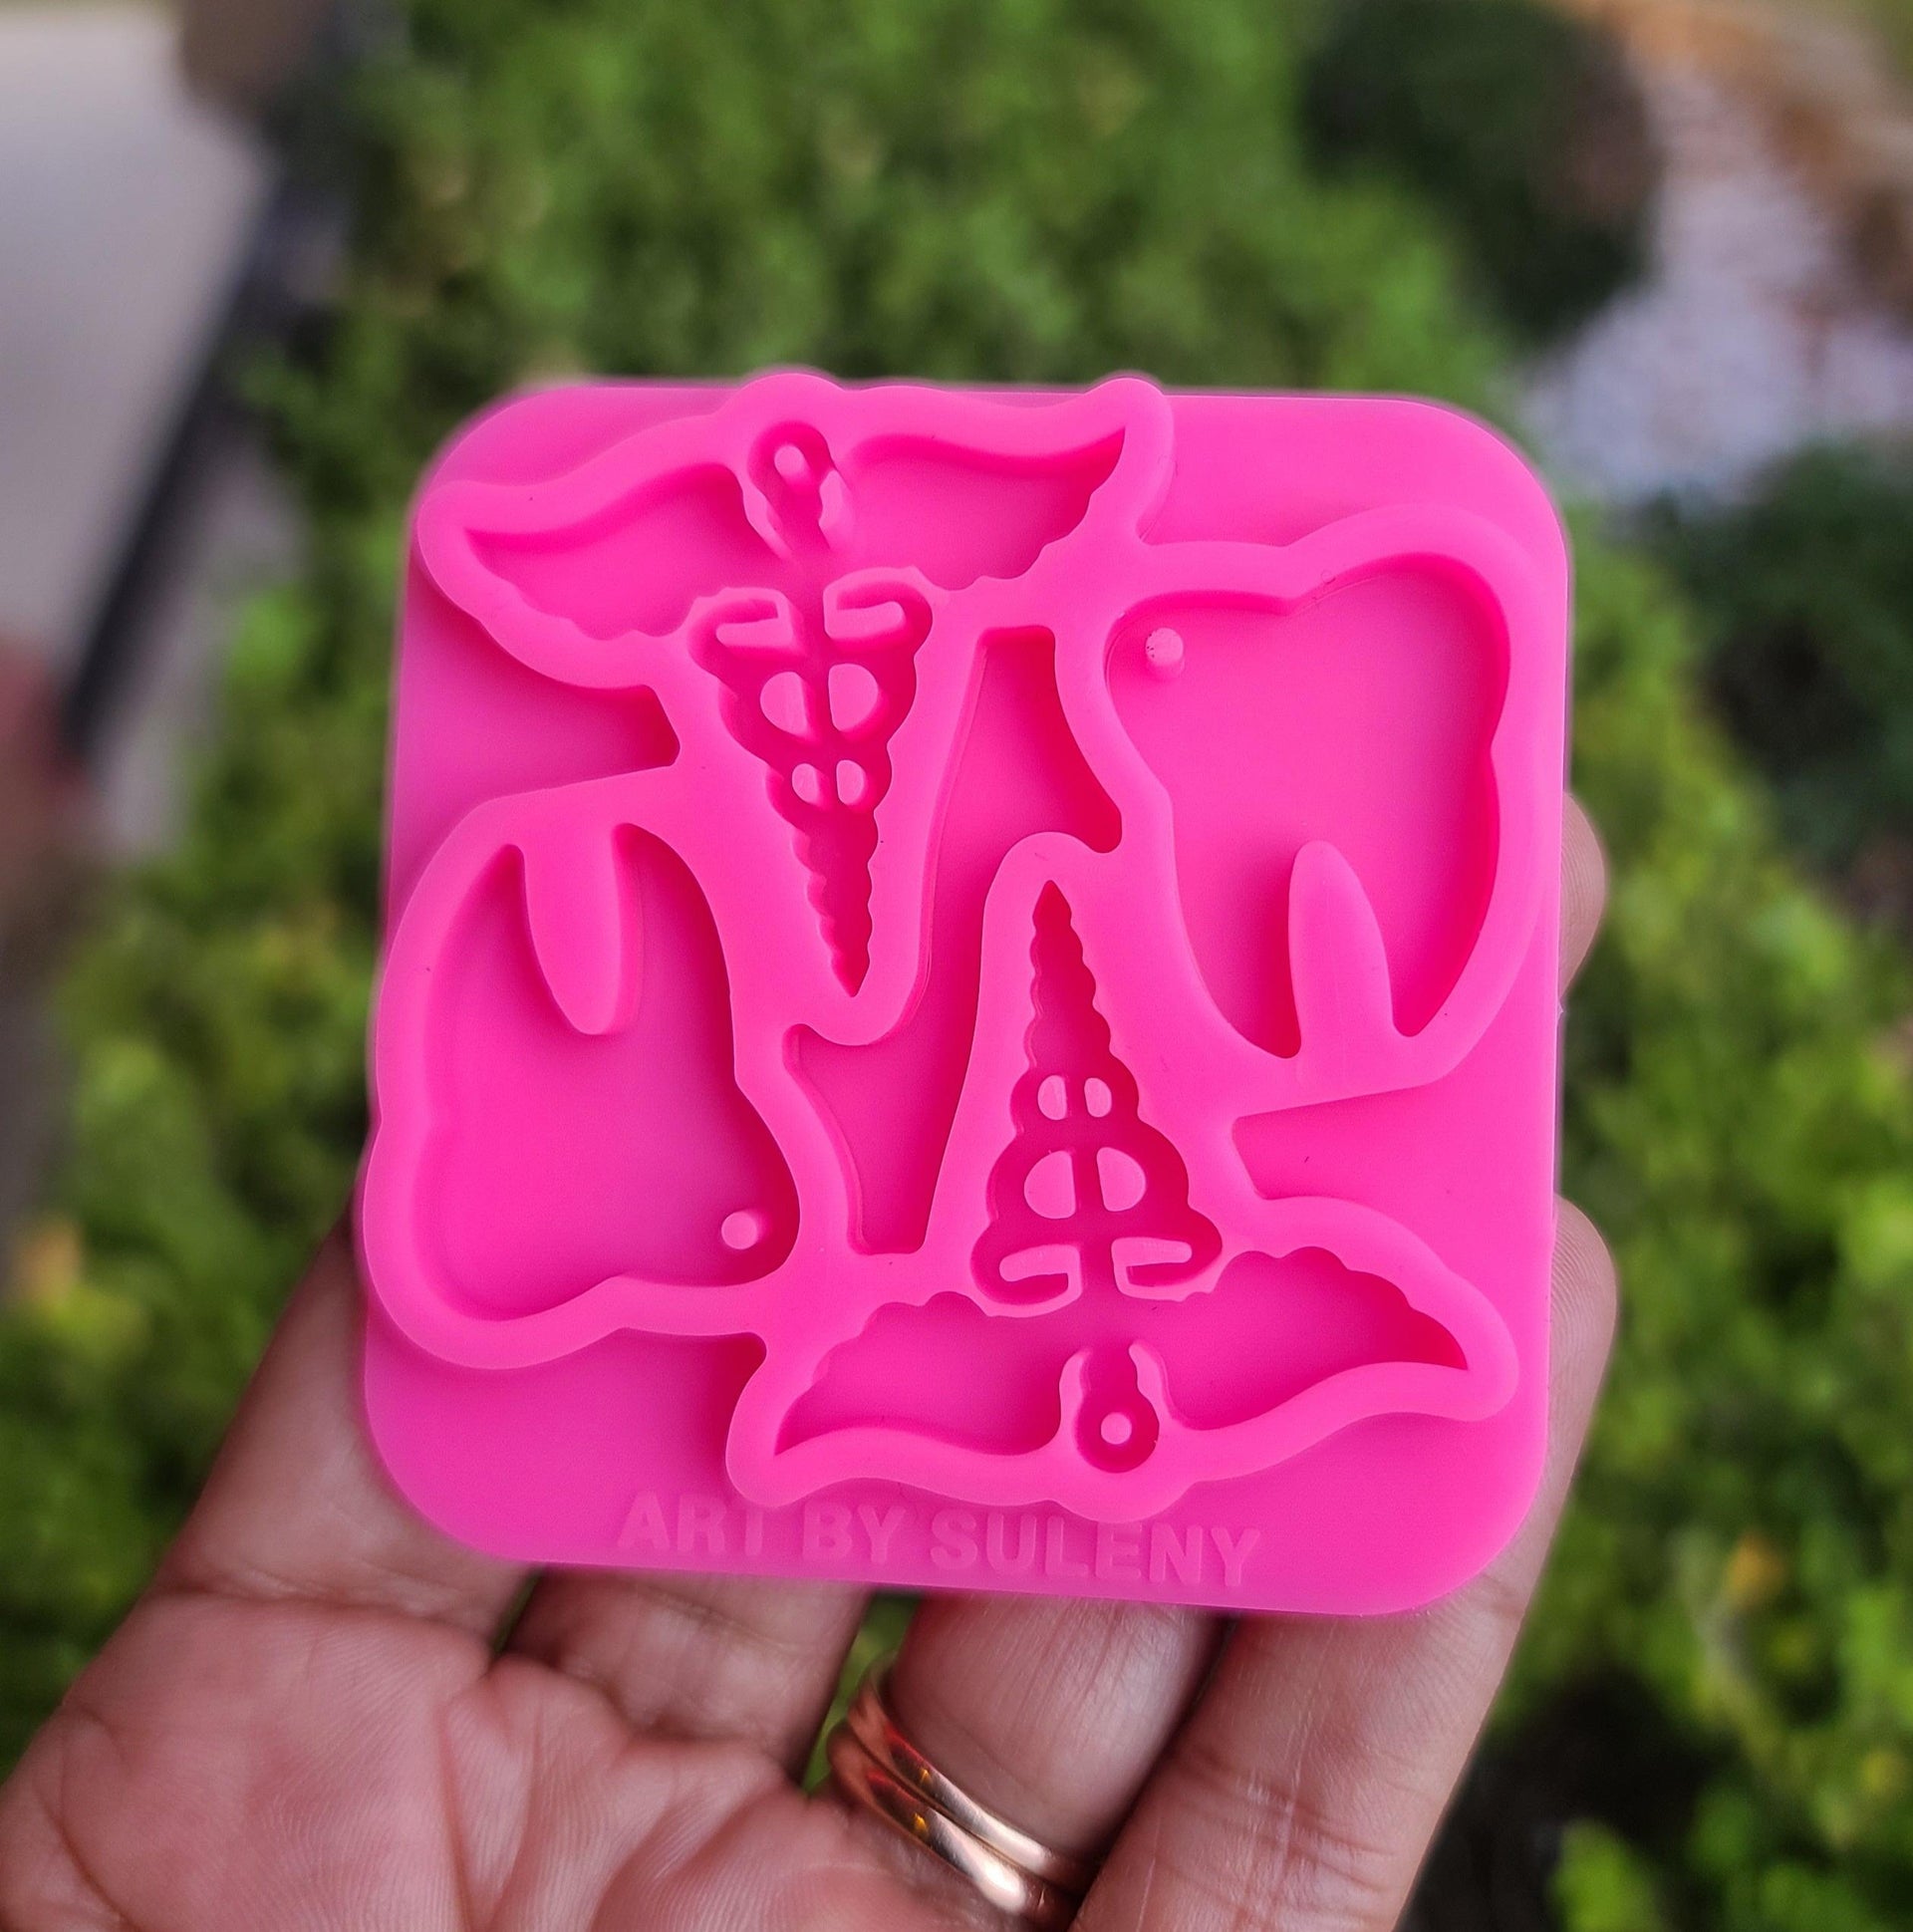 Tooth Silicone Mold - Molar Mold - Medicina Symbol Mold for Earrings - Mold for Resin - Jewelry - Dentist Silicone Mold - Art By Suleny Craft Store LLC